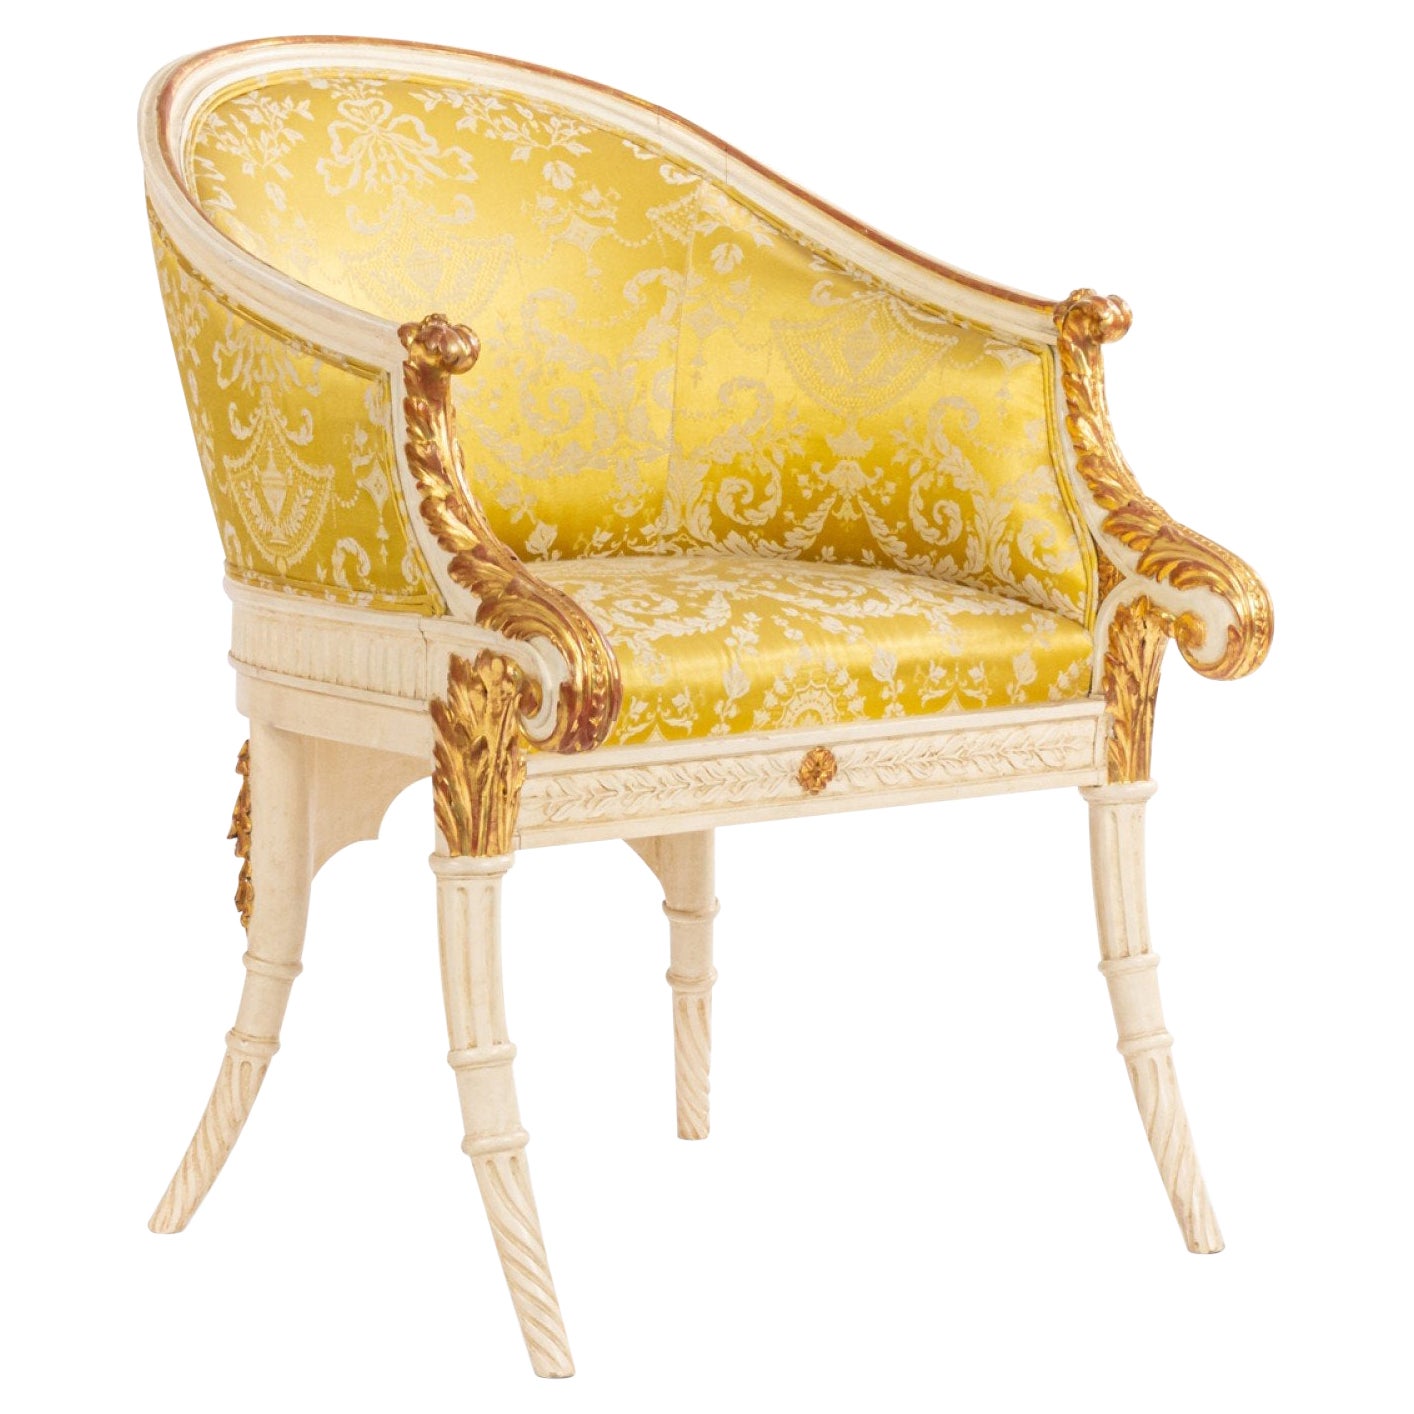 Italian Neo-Classic Style 19th Century White and Gold Arm Chair For Sale